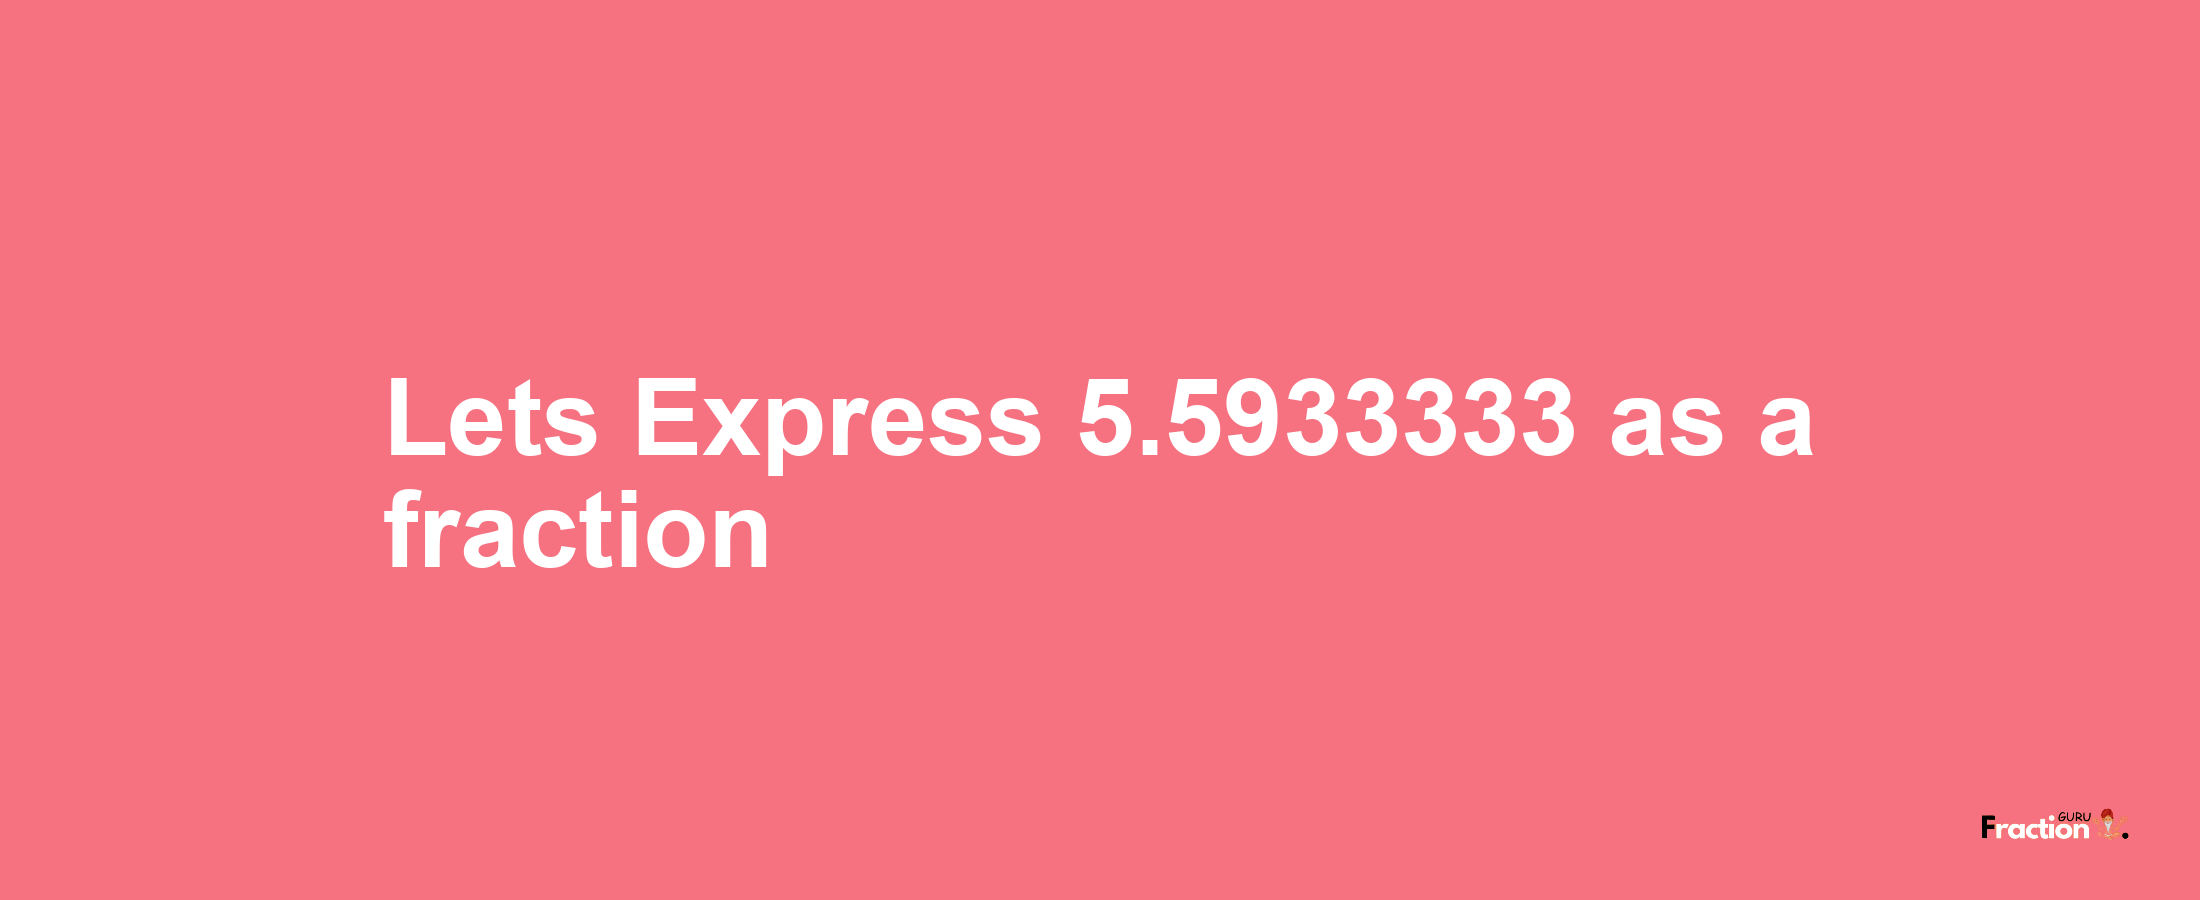 Lets Express 5.5933333 as afraction